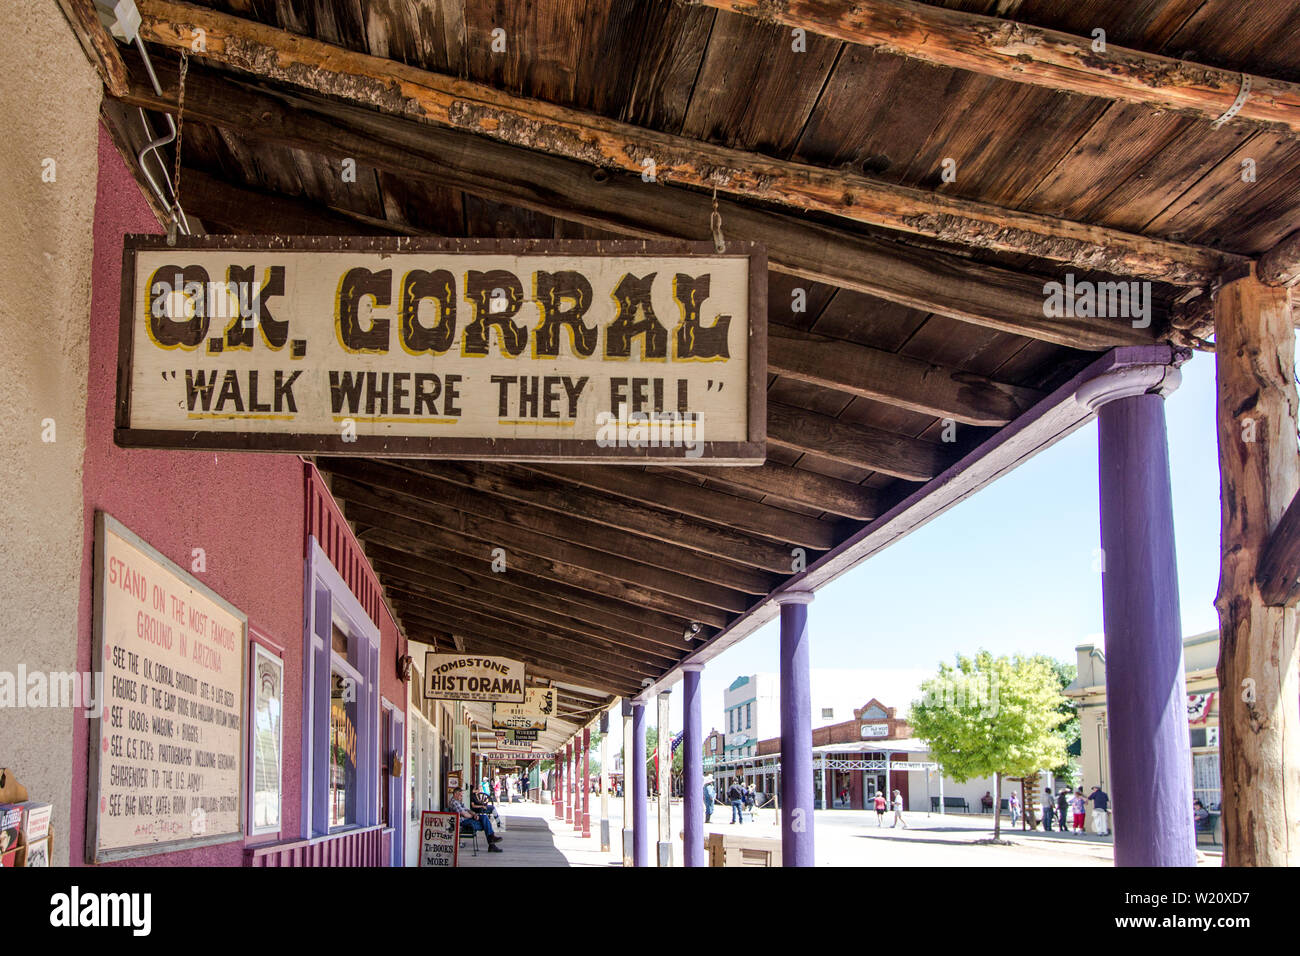 Tombstone, Arizona, USA - Entrance to the famous OK Corral in Tombstone. The small town was the site of an infamous gunfight in the 1800's. Stock Photo